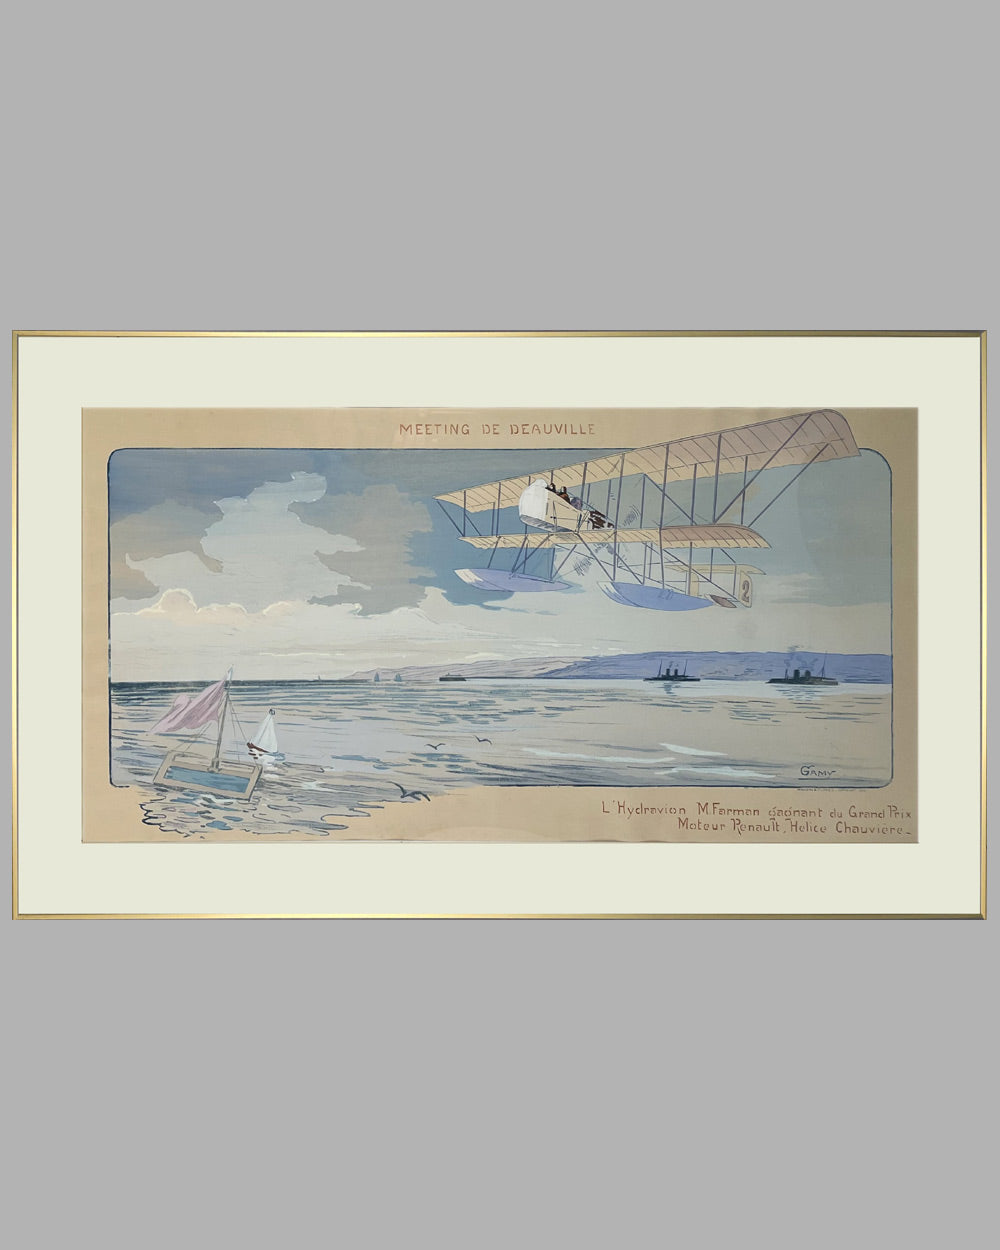 Meeting de Deauville original hand colored lithograph by Gamy (Marguerite Montaut), 1913